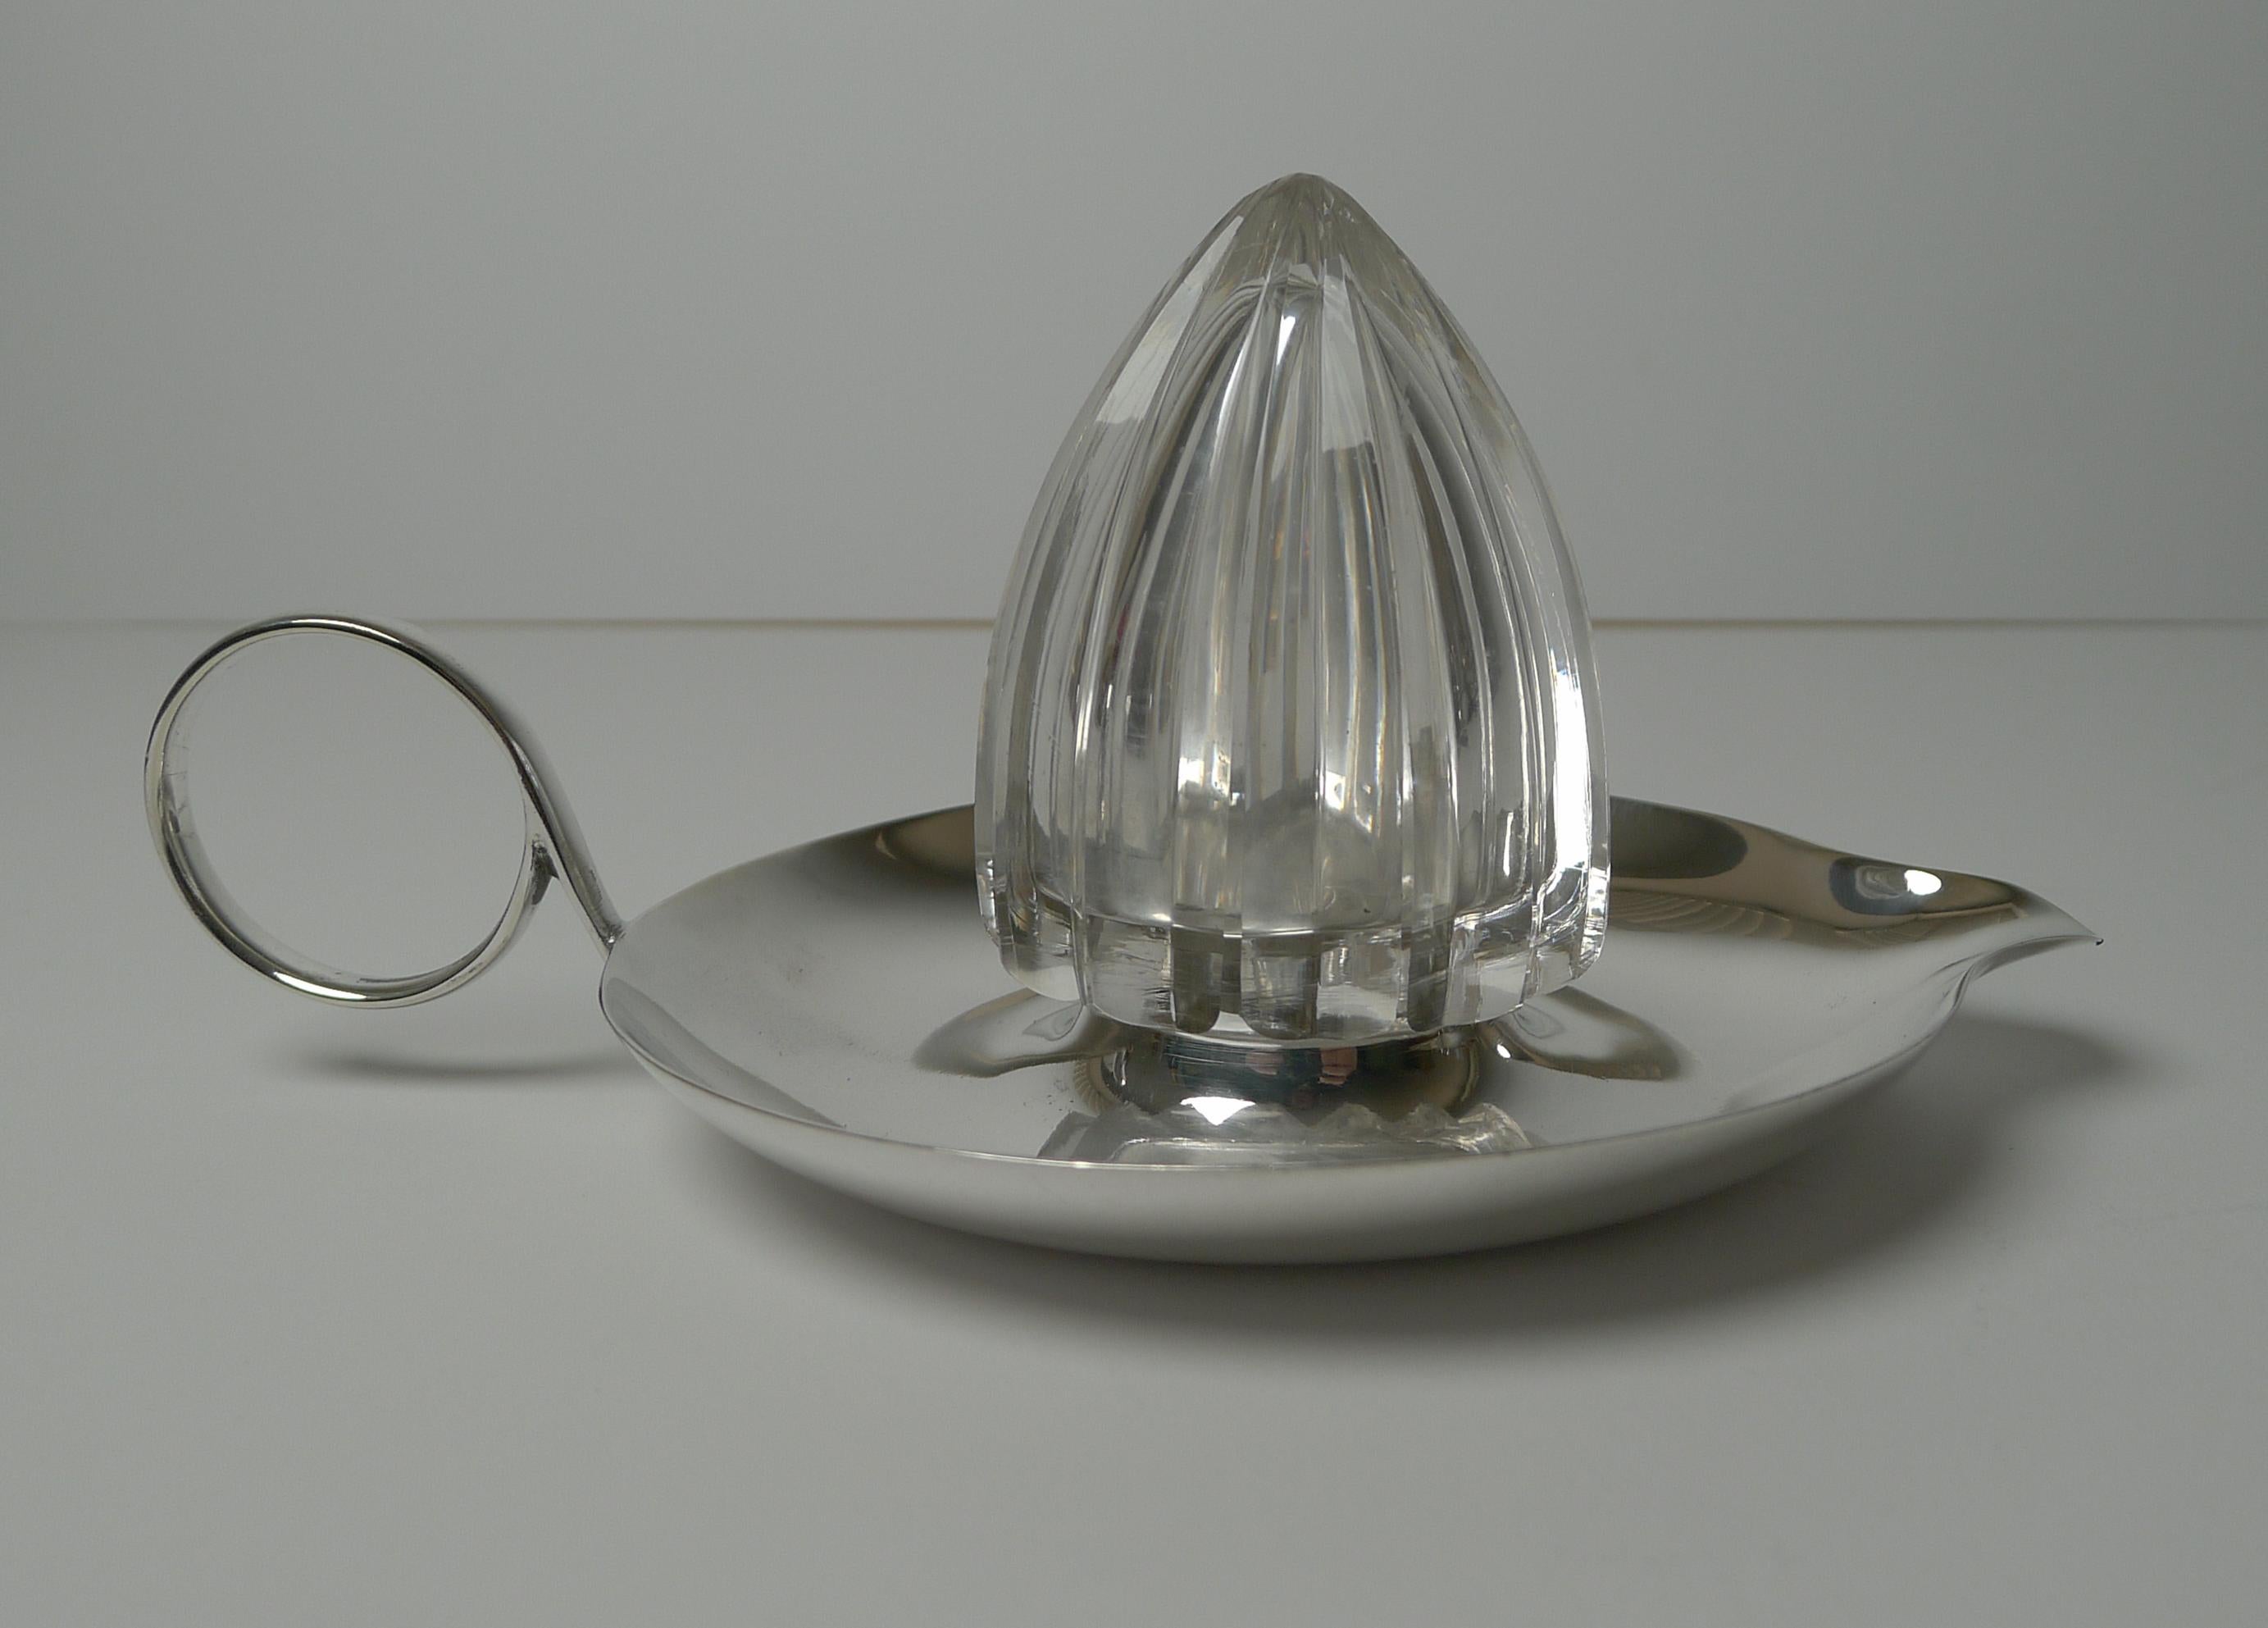 Edwardian Rare Antique Silver Plate and Cut Crystal Lemon Squeezer, c.1910 For Sale